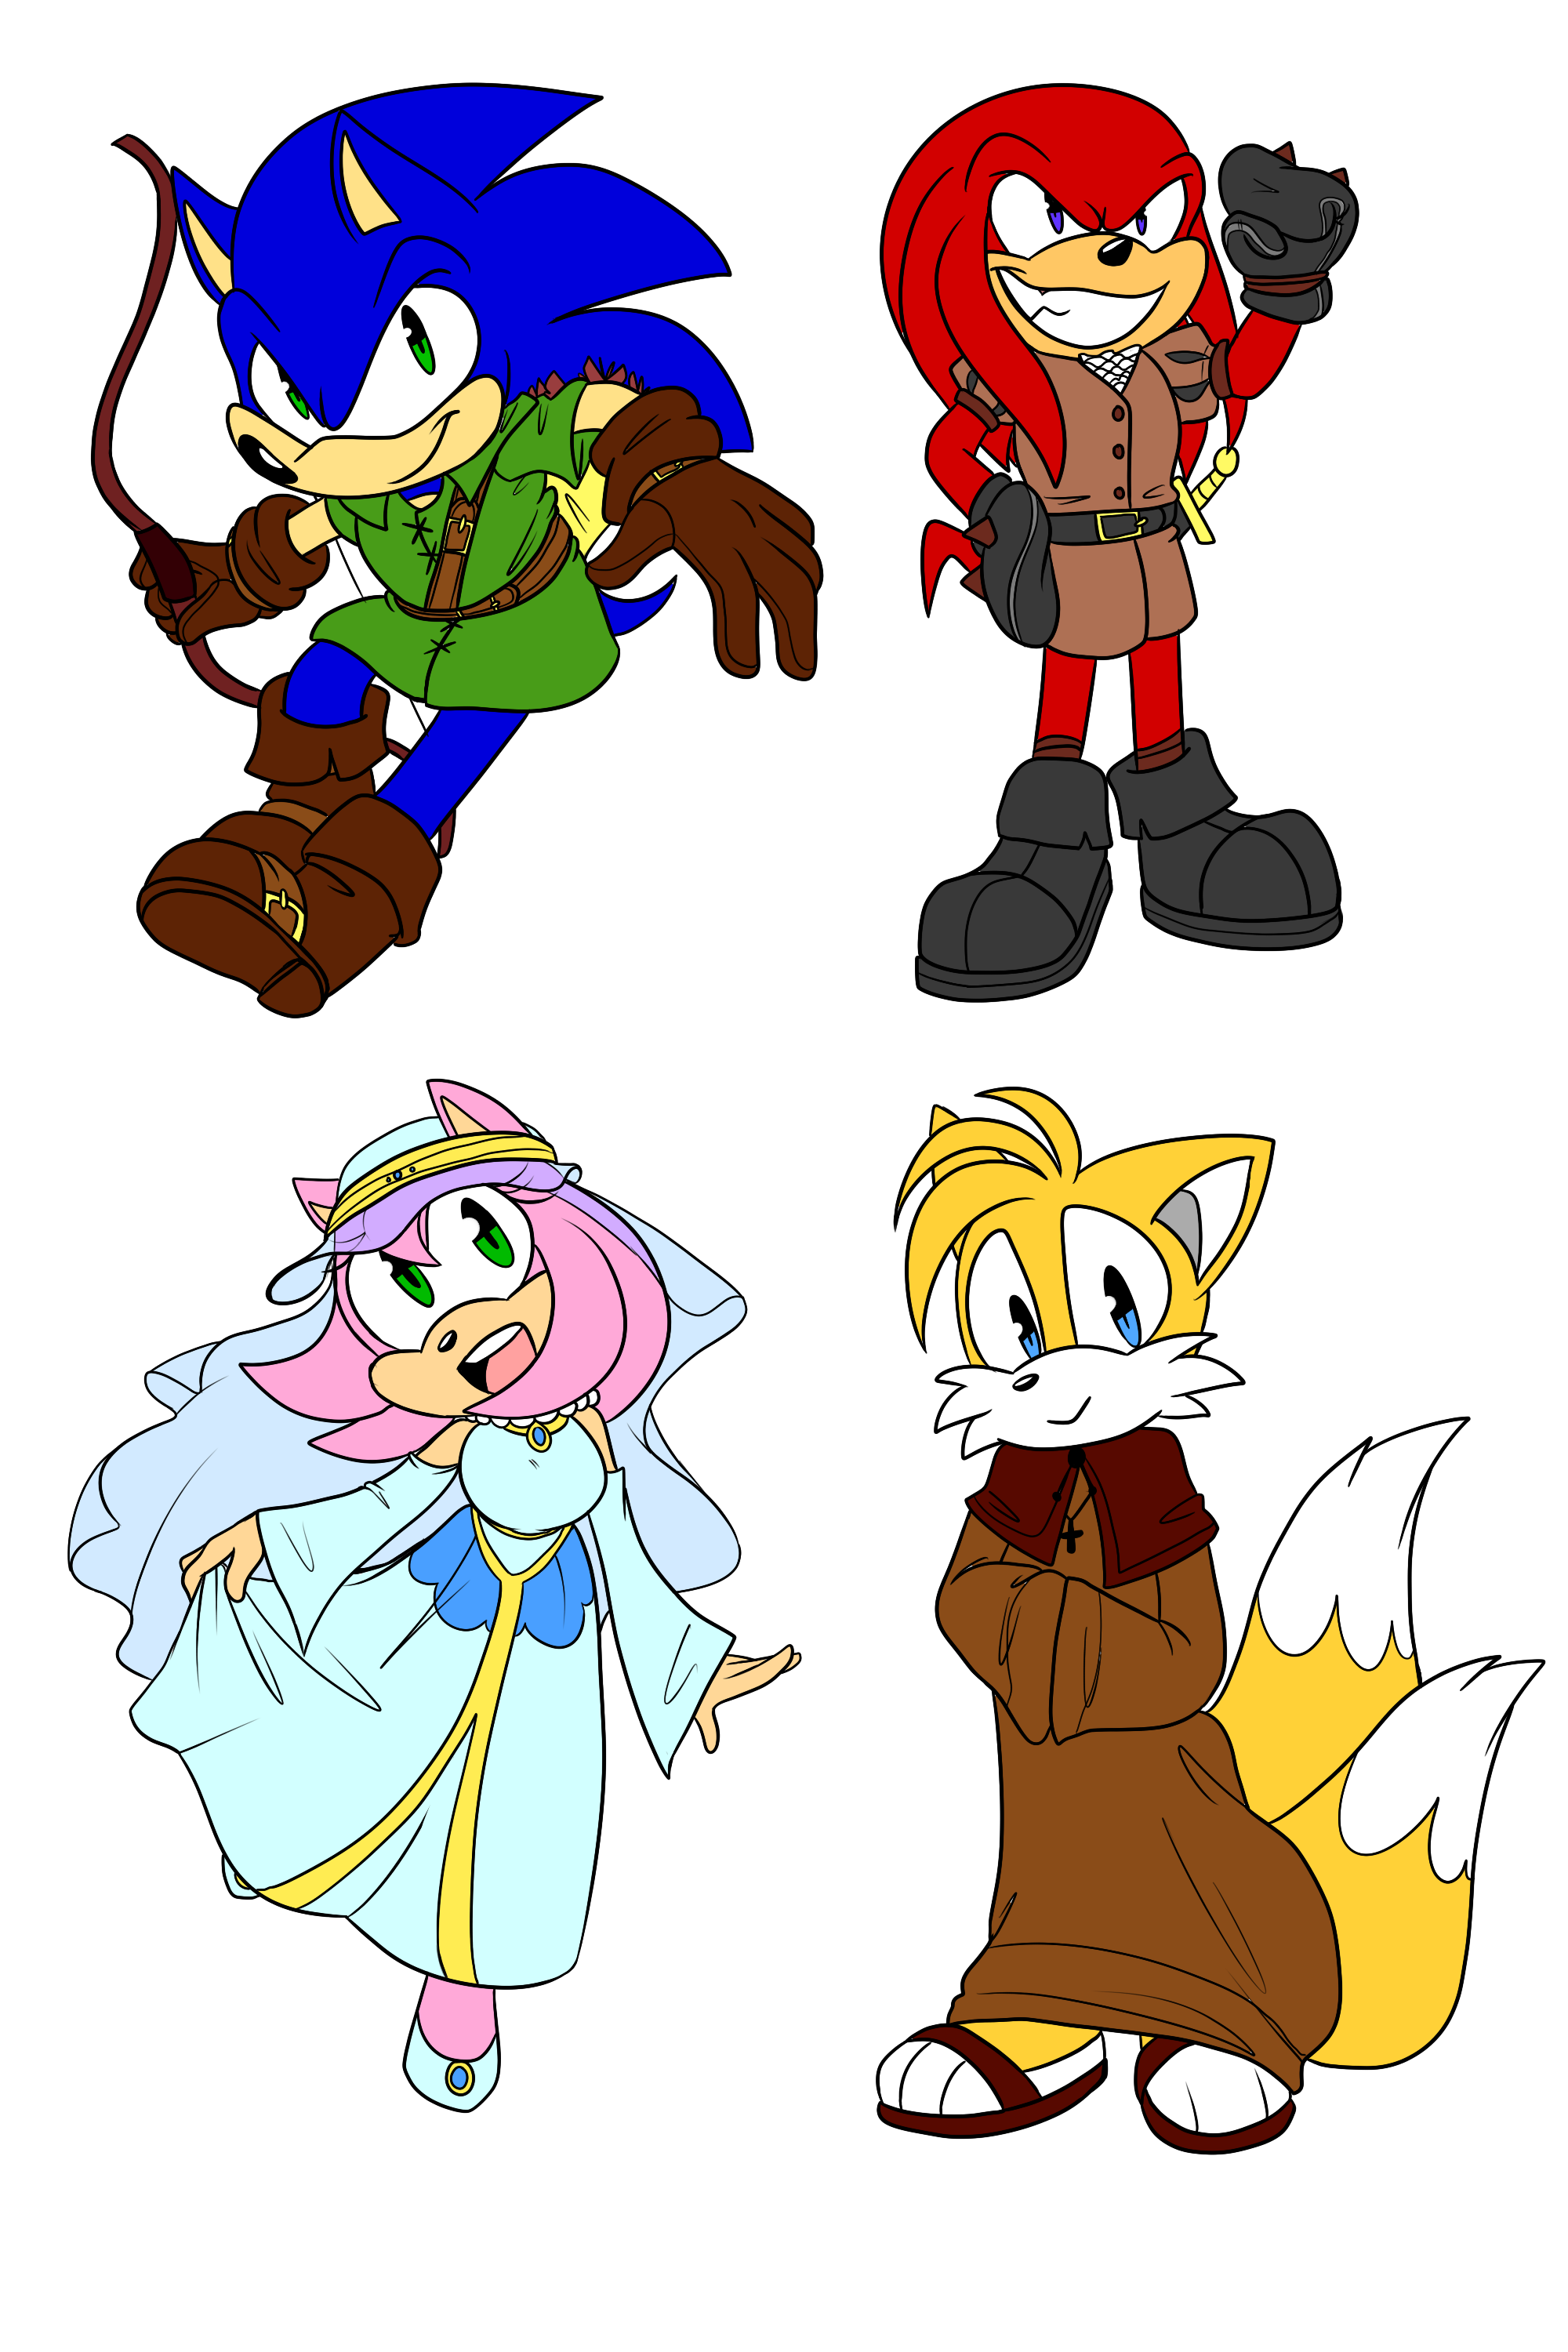 Sonic as Robin Hood by GingyGin on DeviantArt